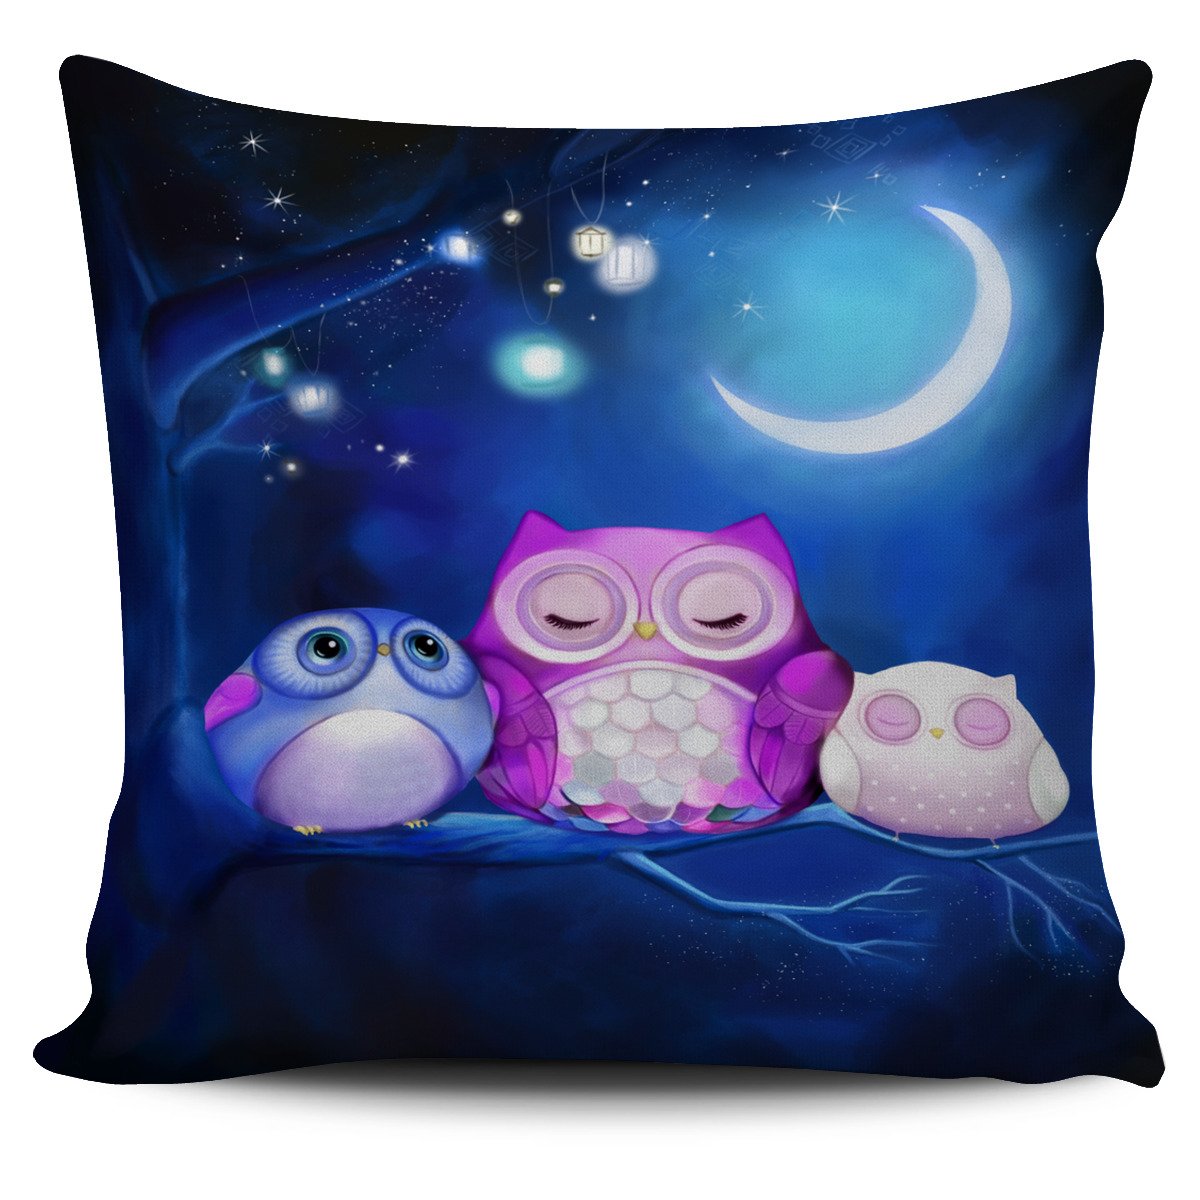 Owl Cute Night Pillow Cover